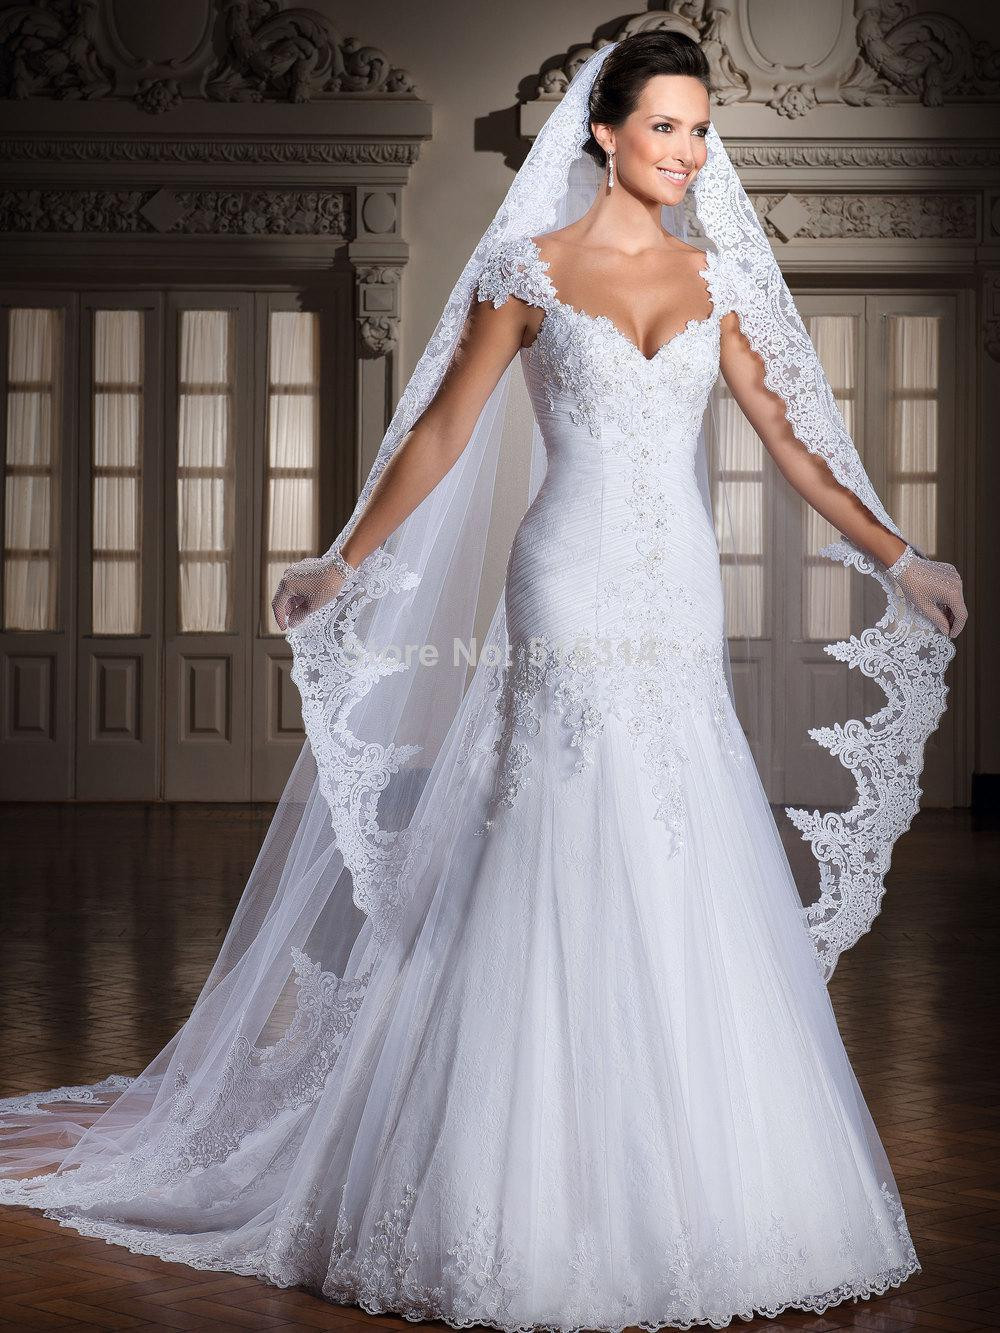 Sexy Dresses To Wear To A Wedding
 New Design 2015 Traditional Wedding Dress y A line